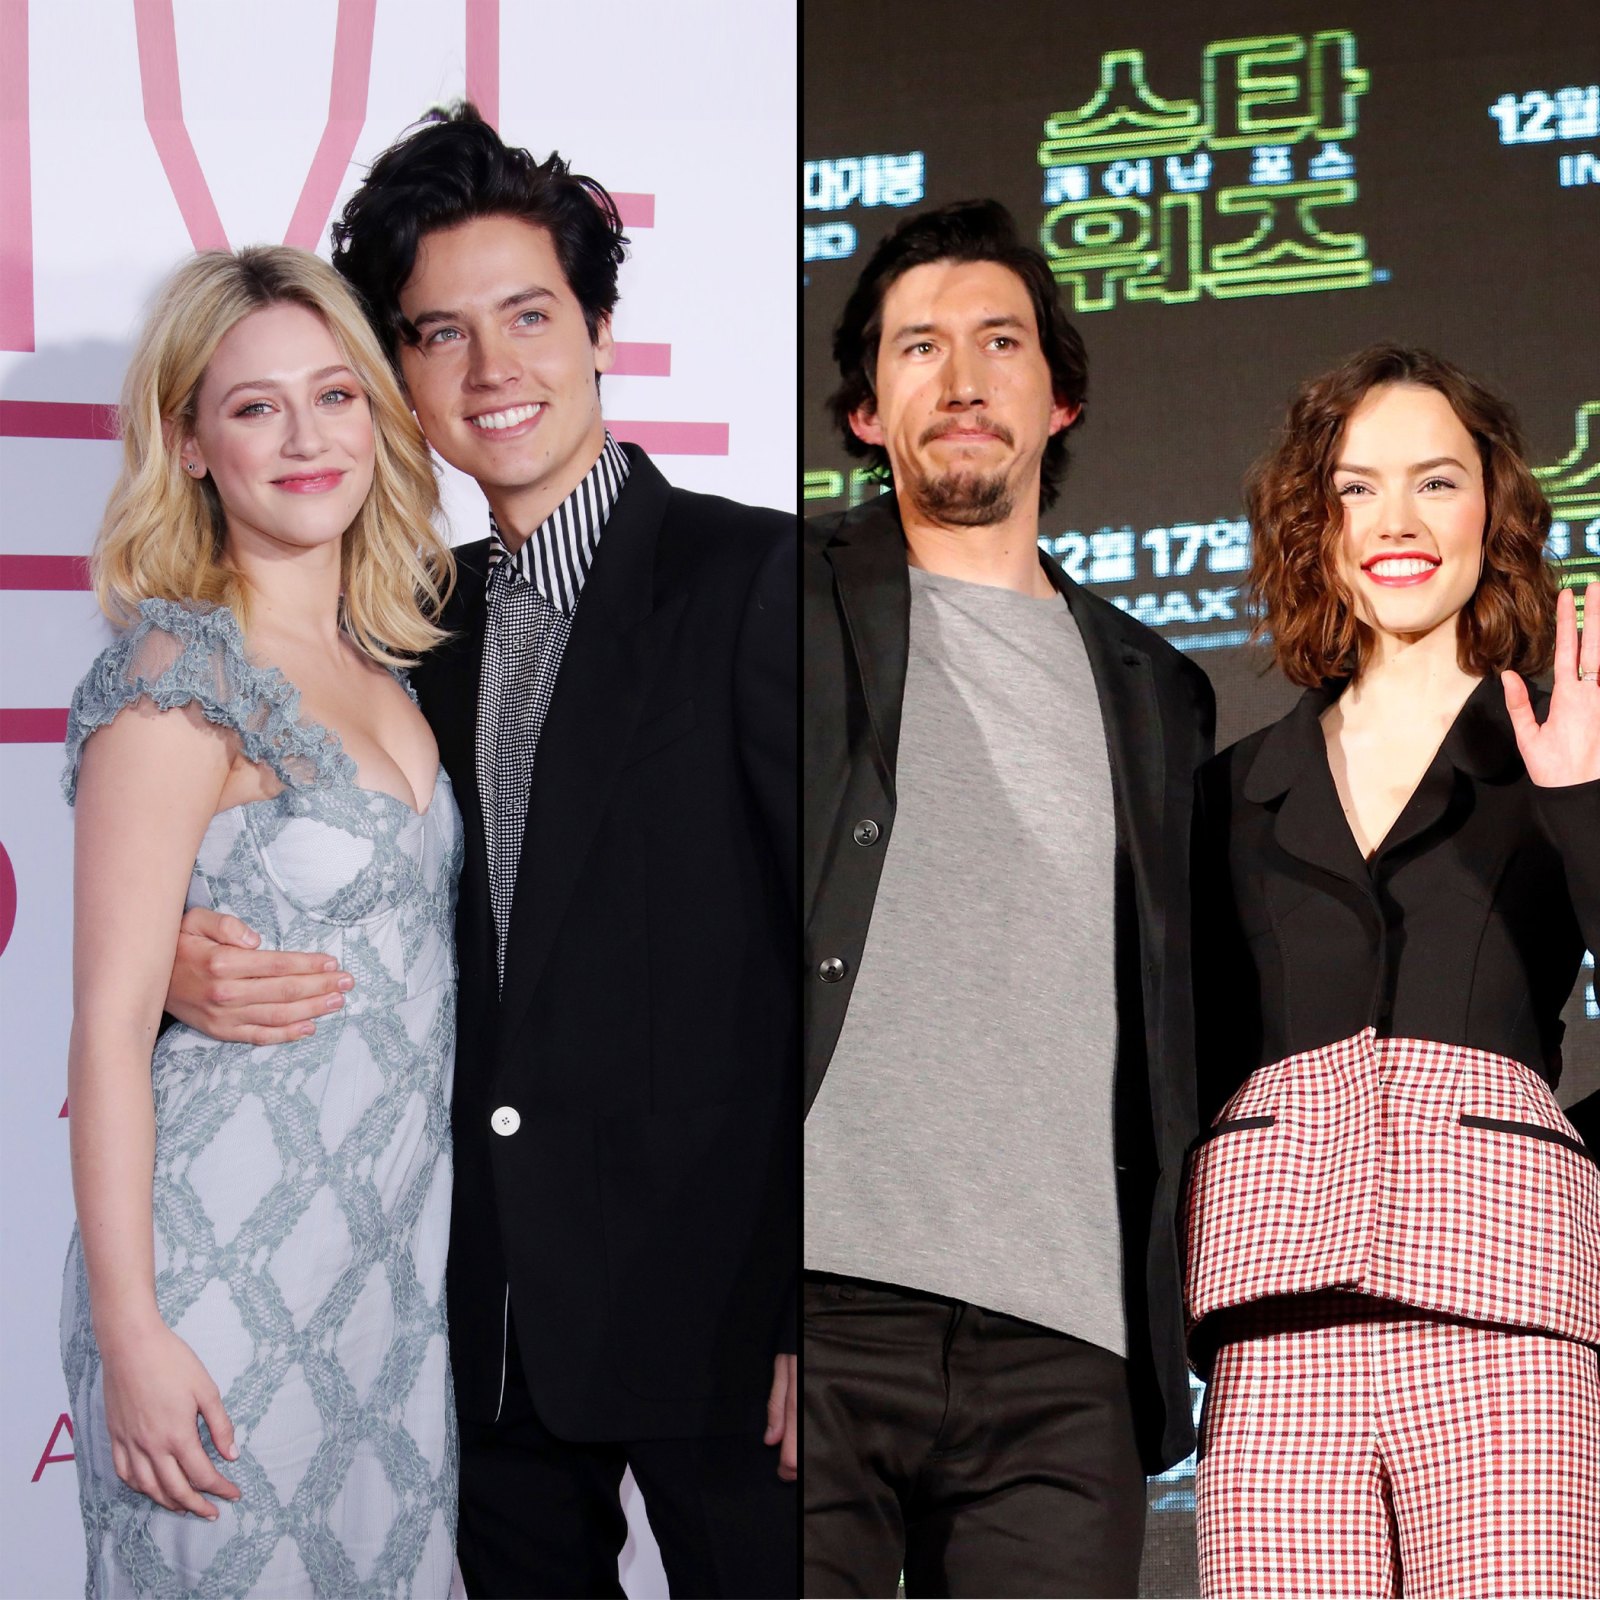 Most Polarizing TV and Movie Couples Through the Years- From Star Wars' Reylo to Buffy's Spuffy - 079